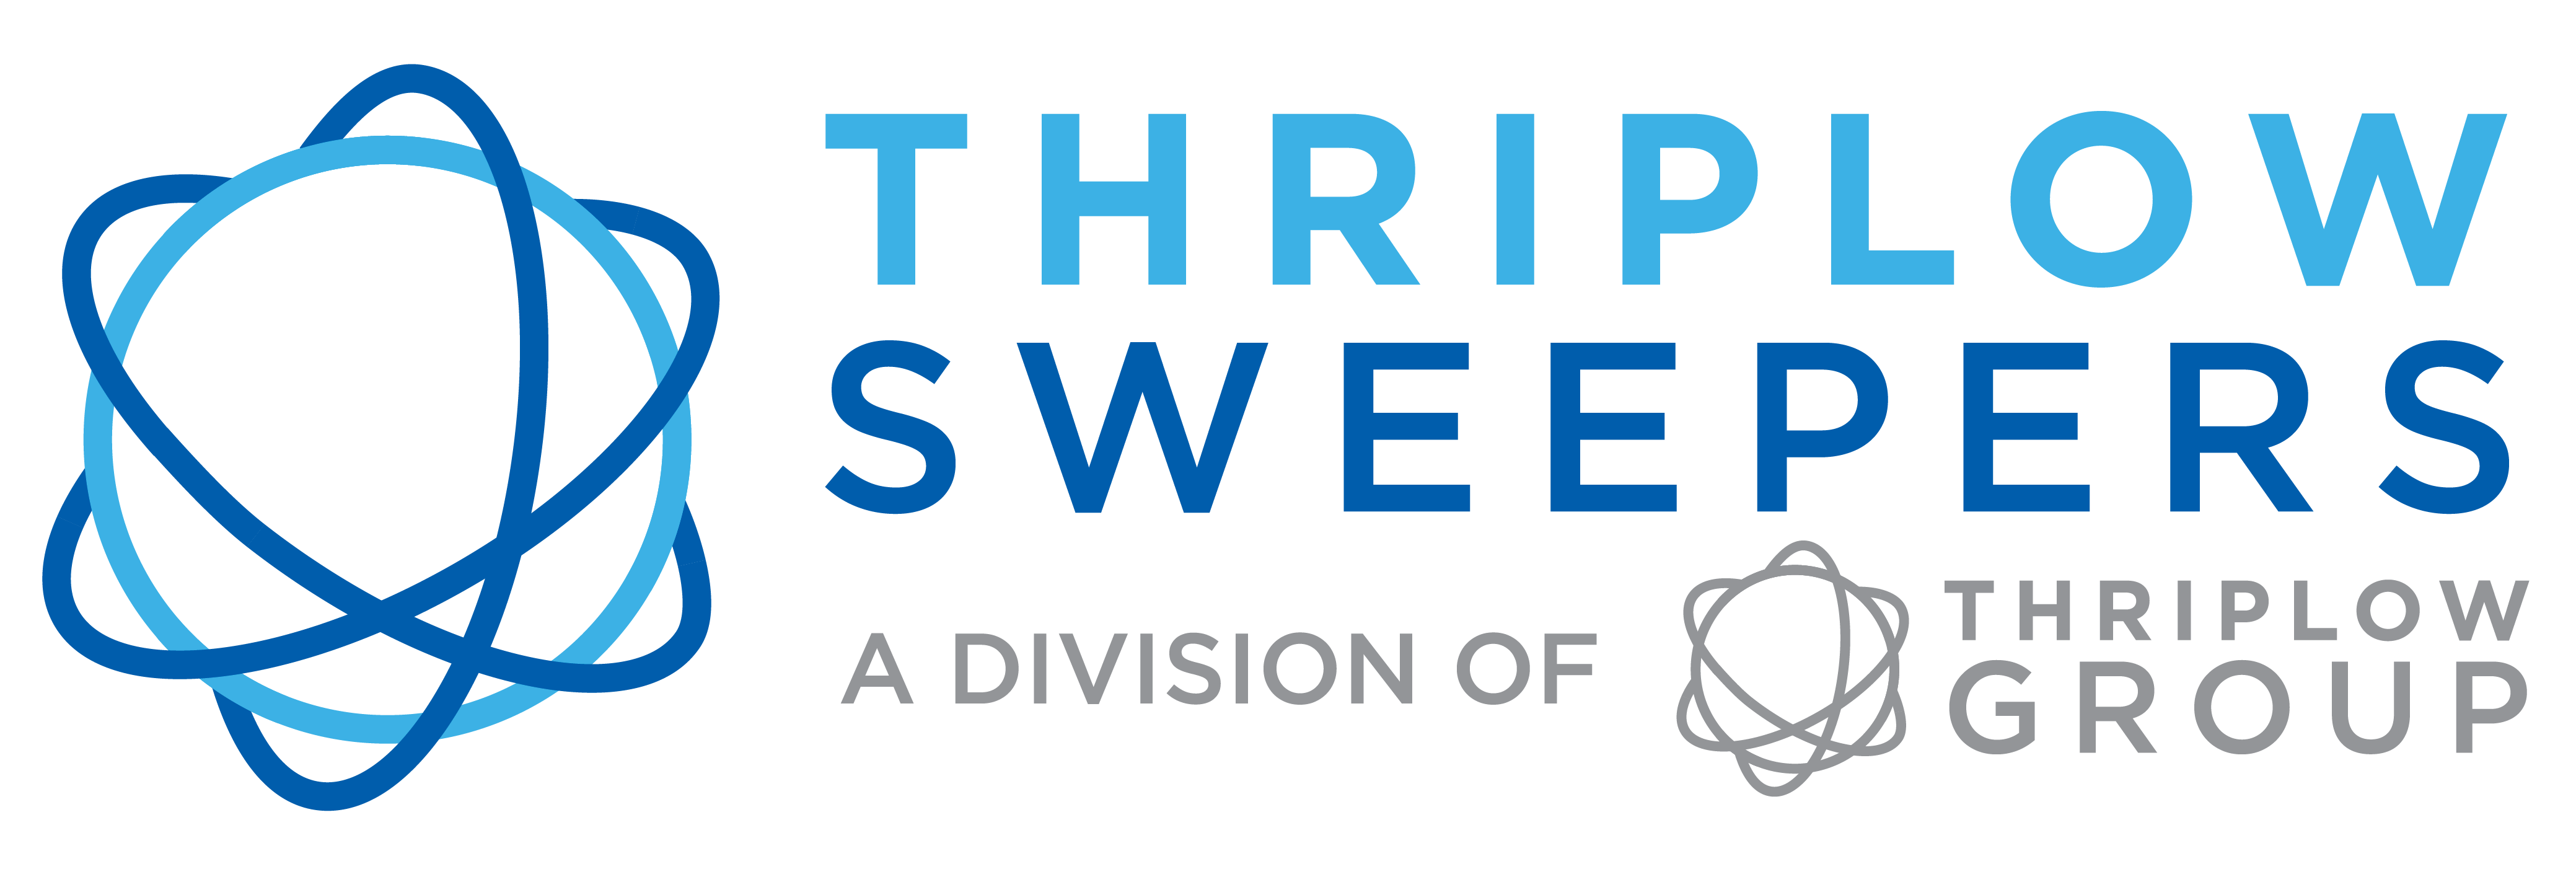 Thriplow sweepers Logo-01